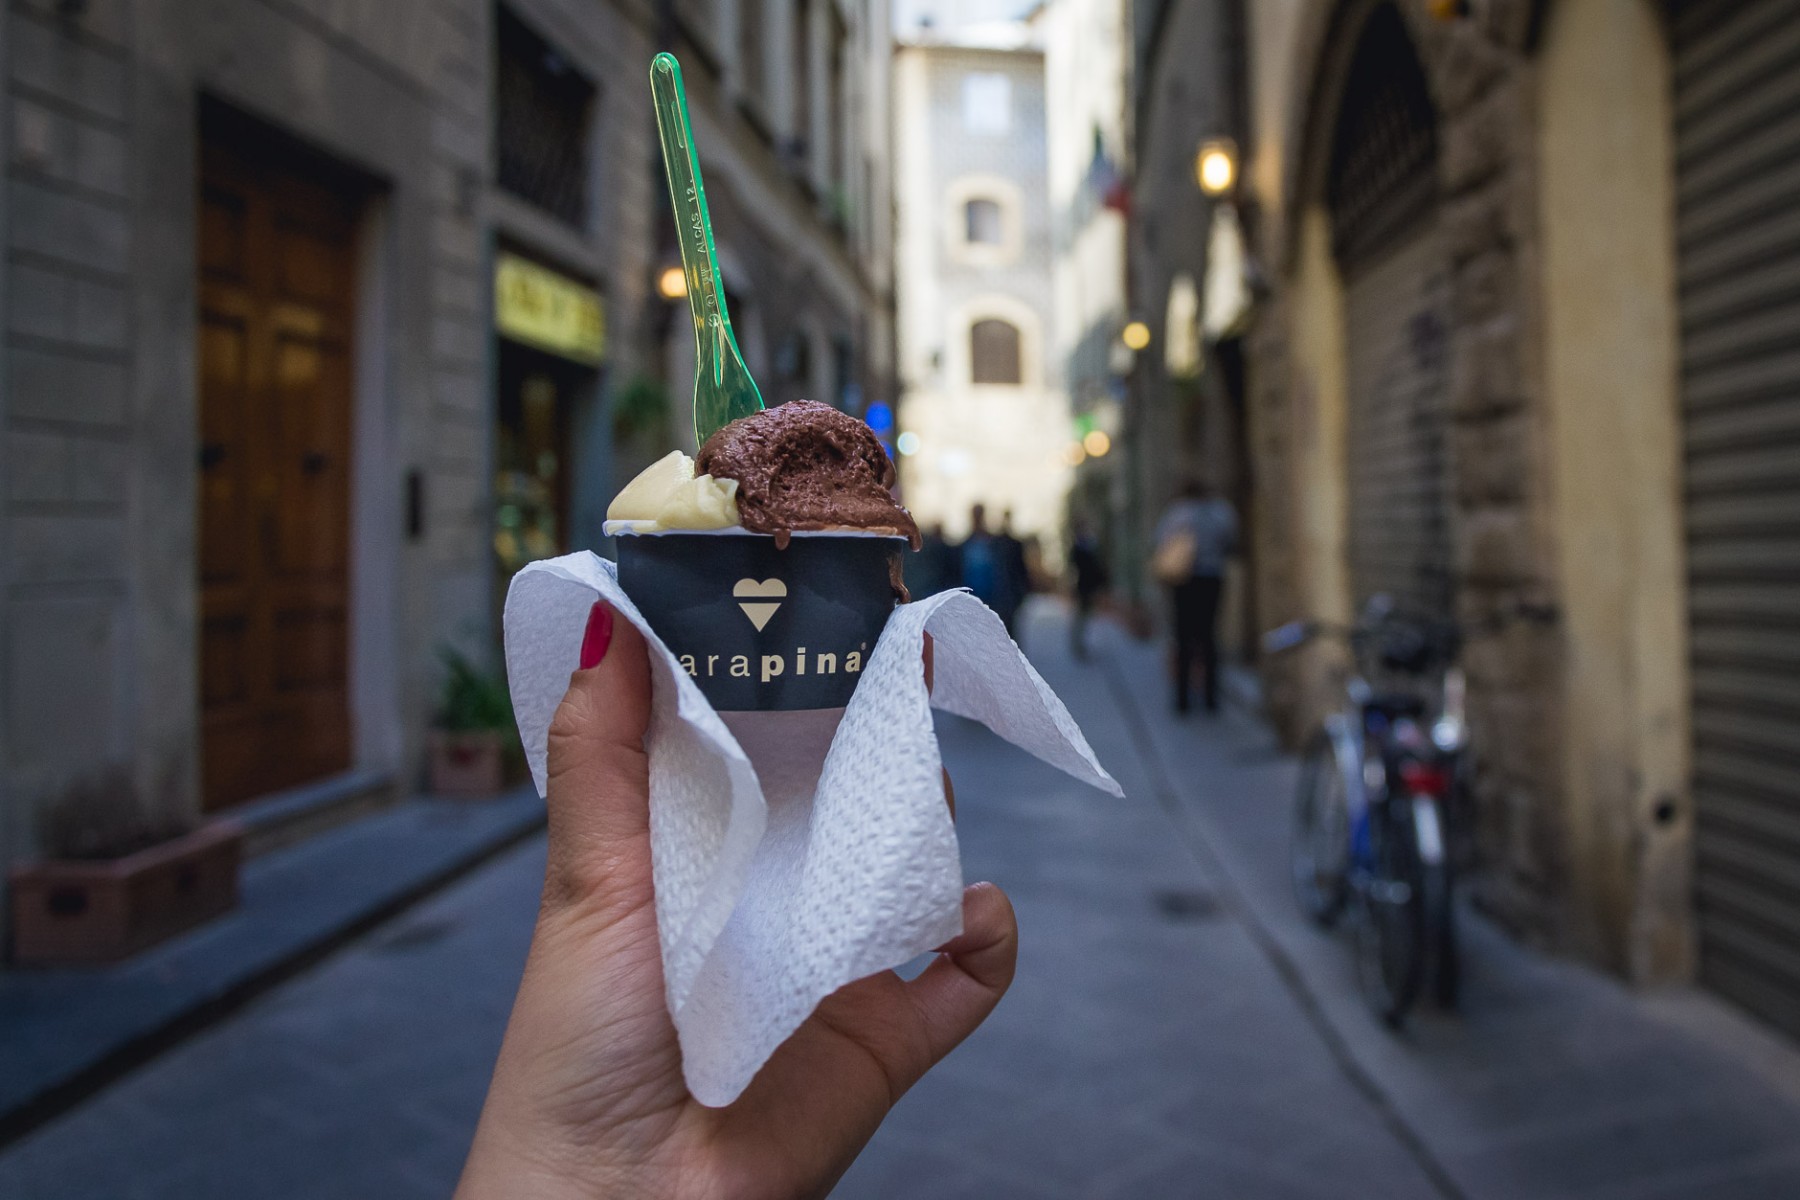 Carapina gelato in Florence, Italy 